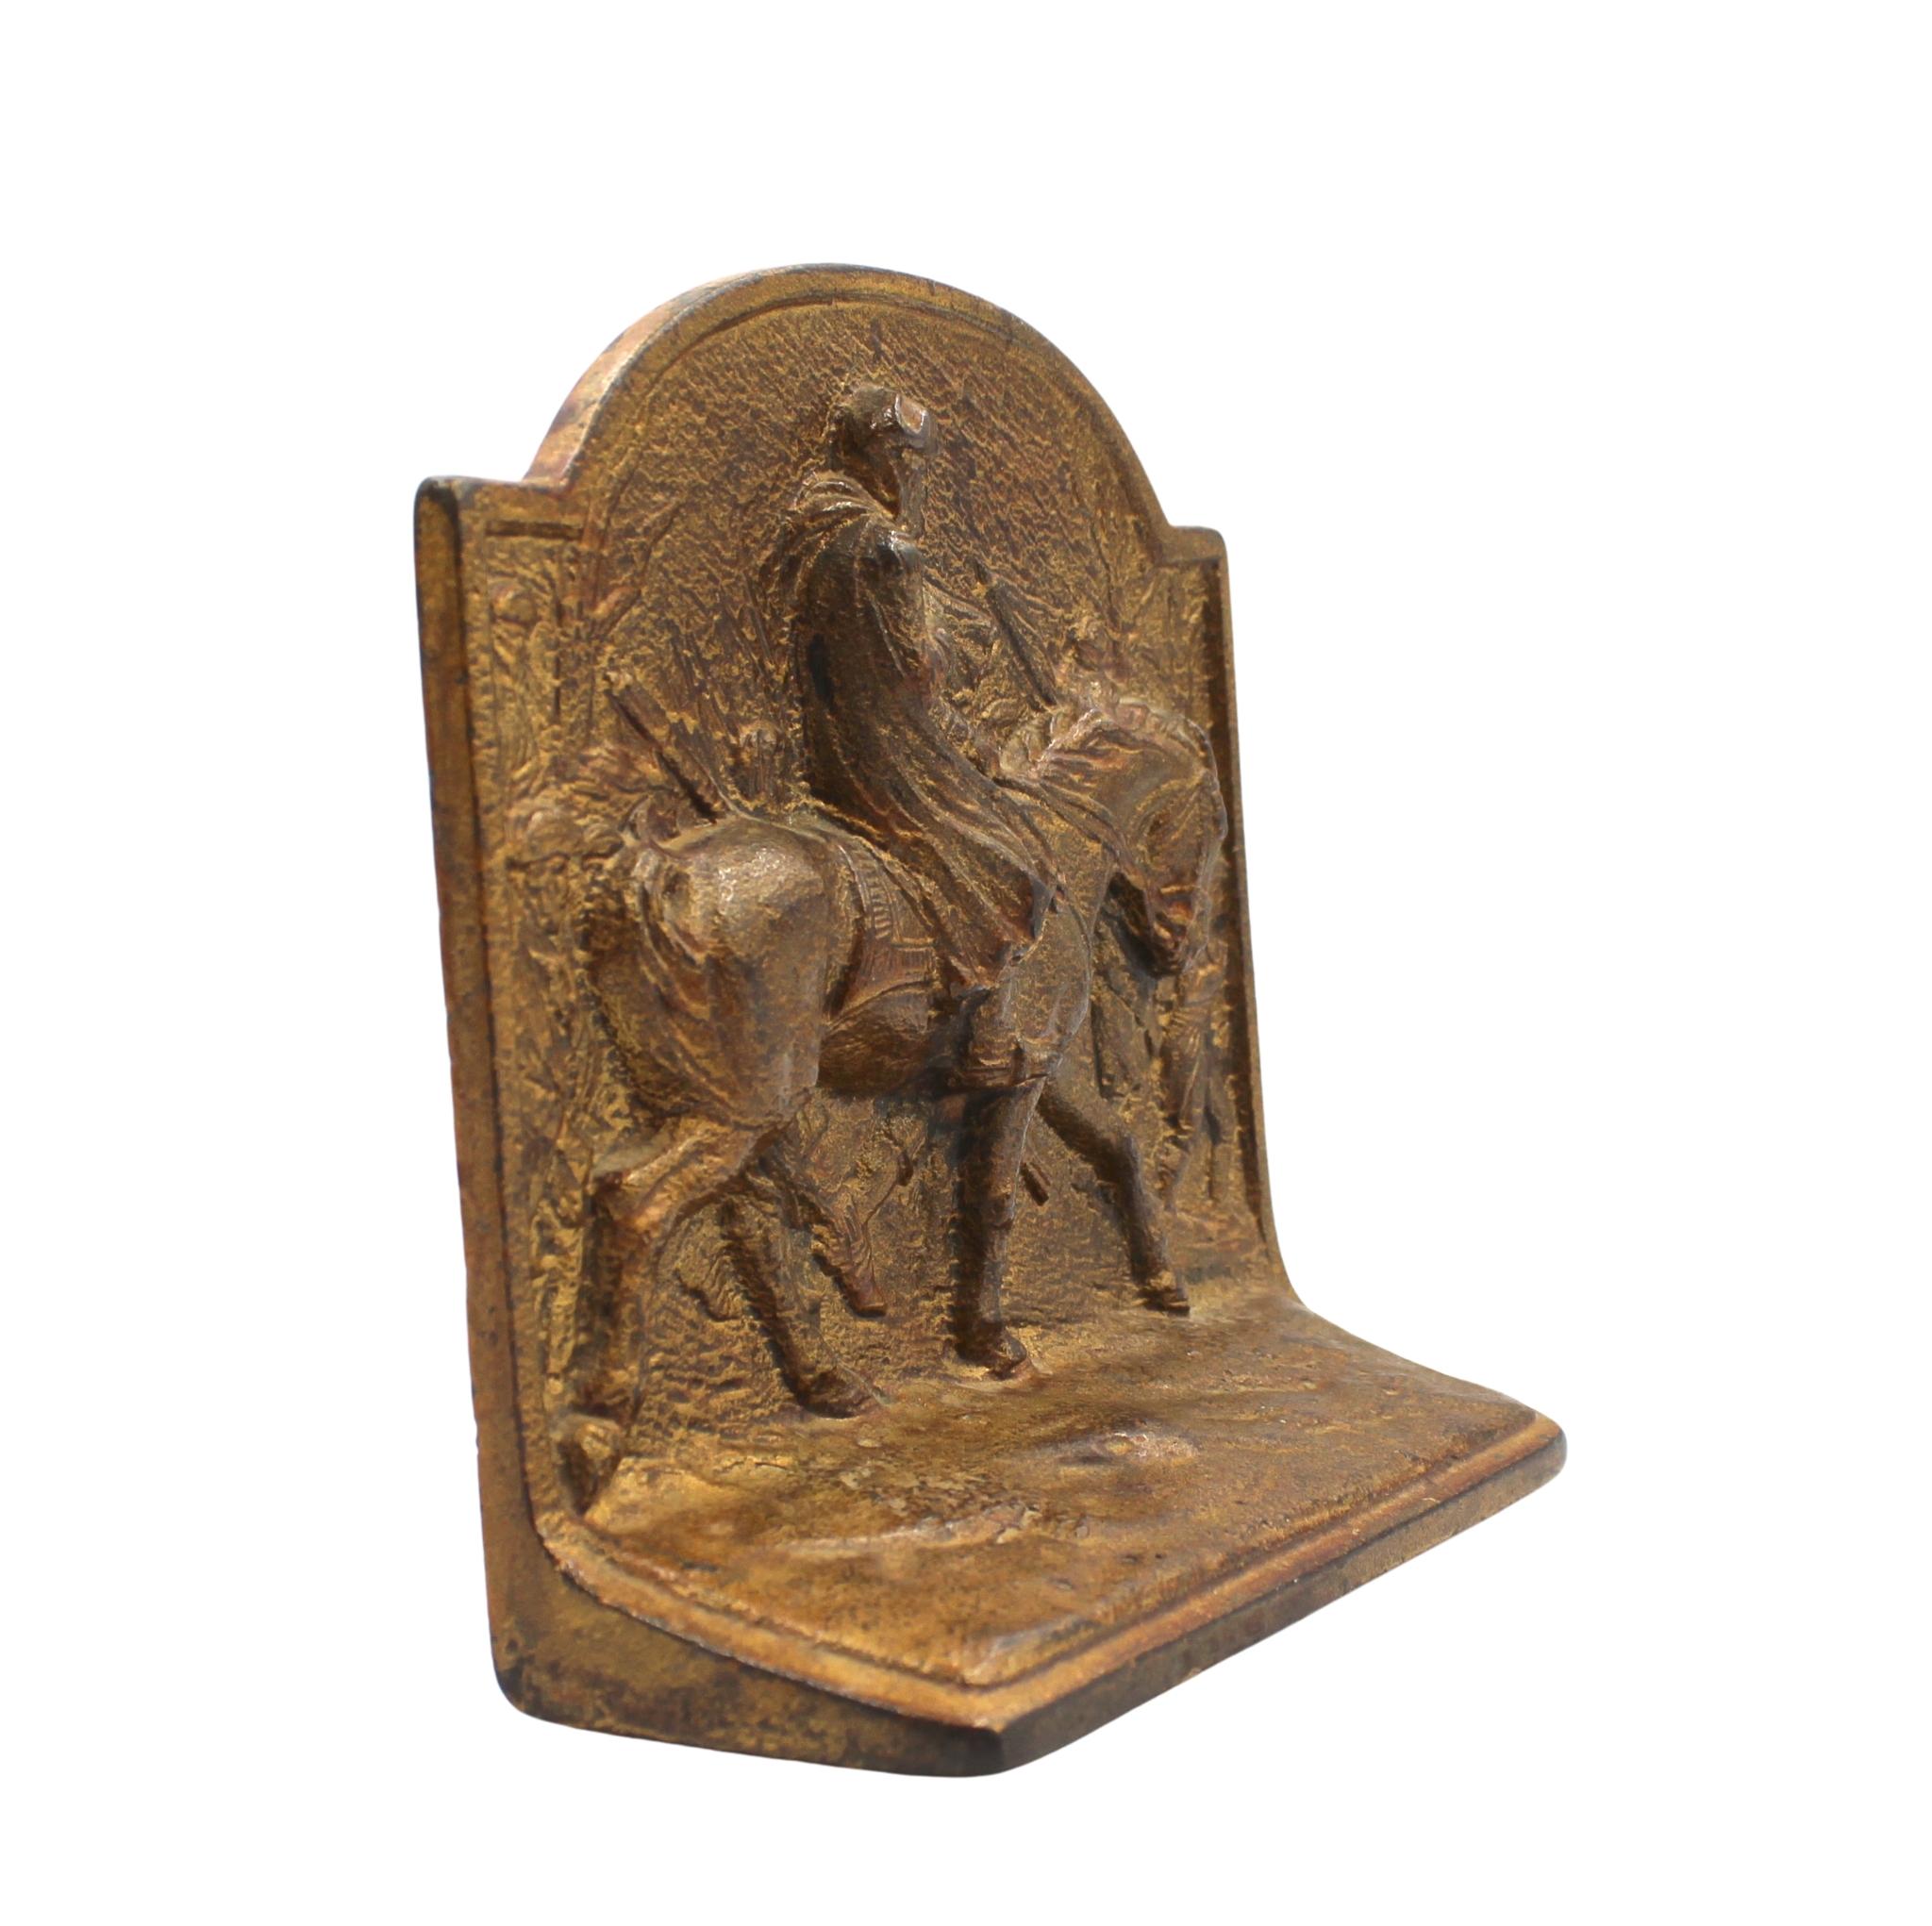 Cast Vintage Washington at Valley Forge Bookends by Hubley, Circa 1925